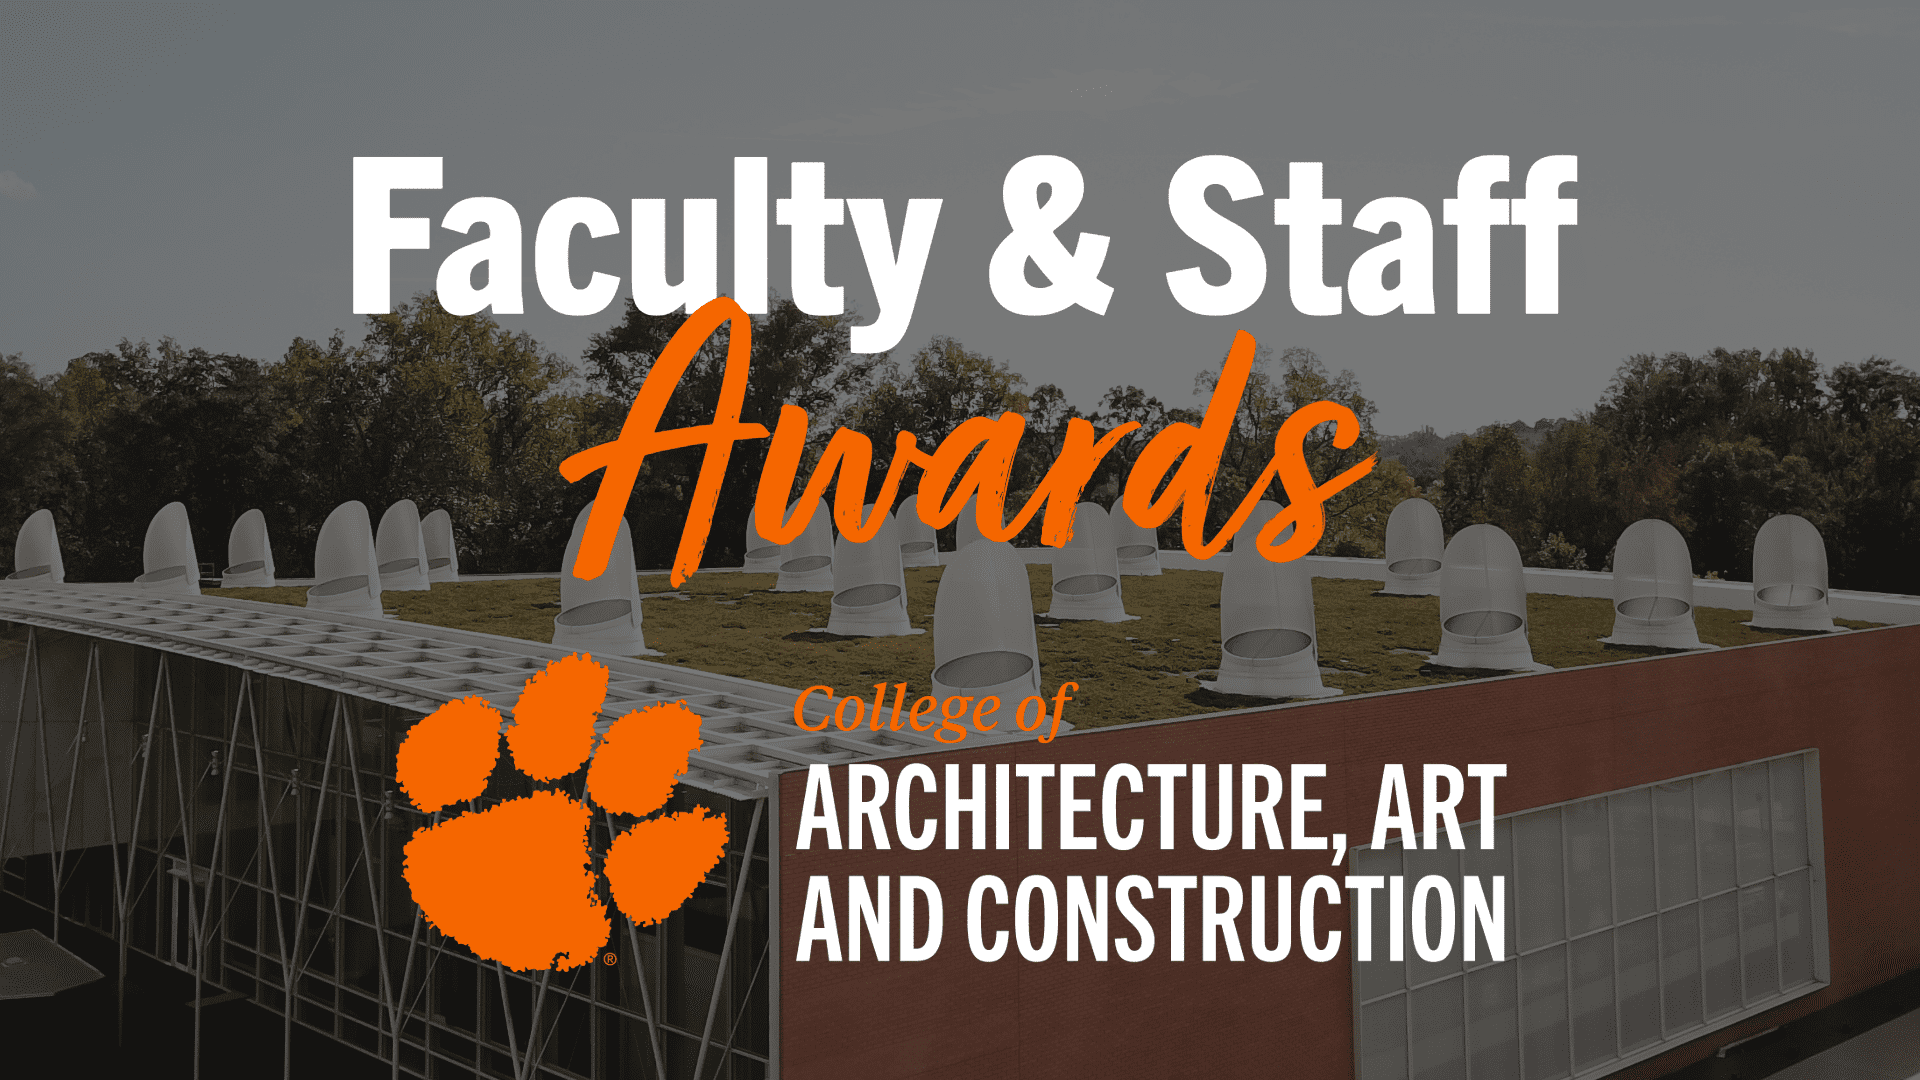 Faculty and Staff awards graphic with College of Architecture, Art and Construction logo